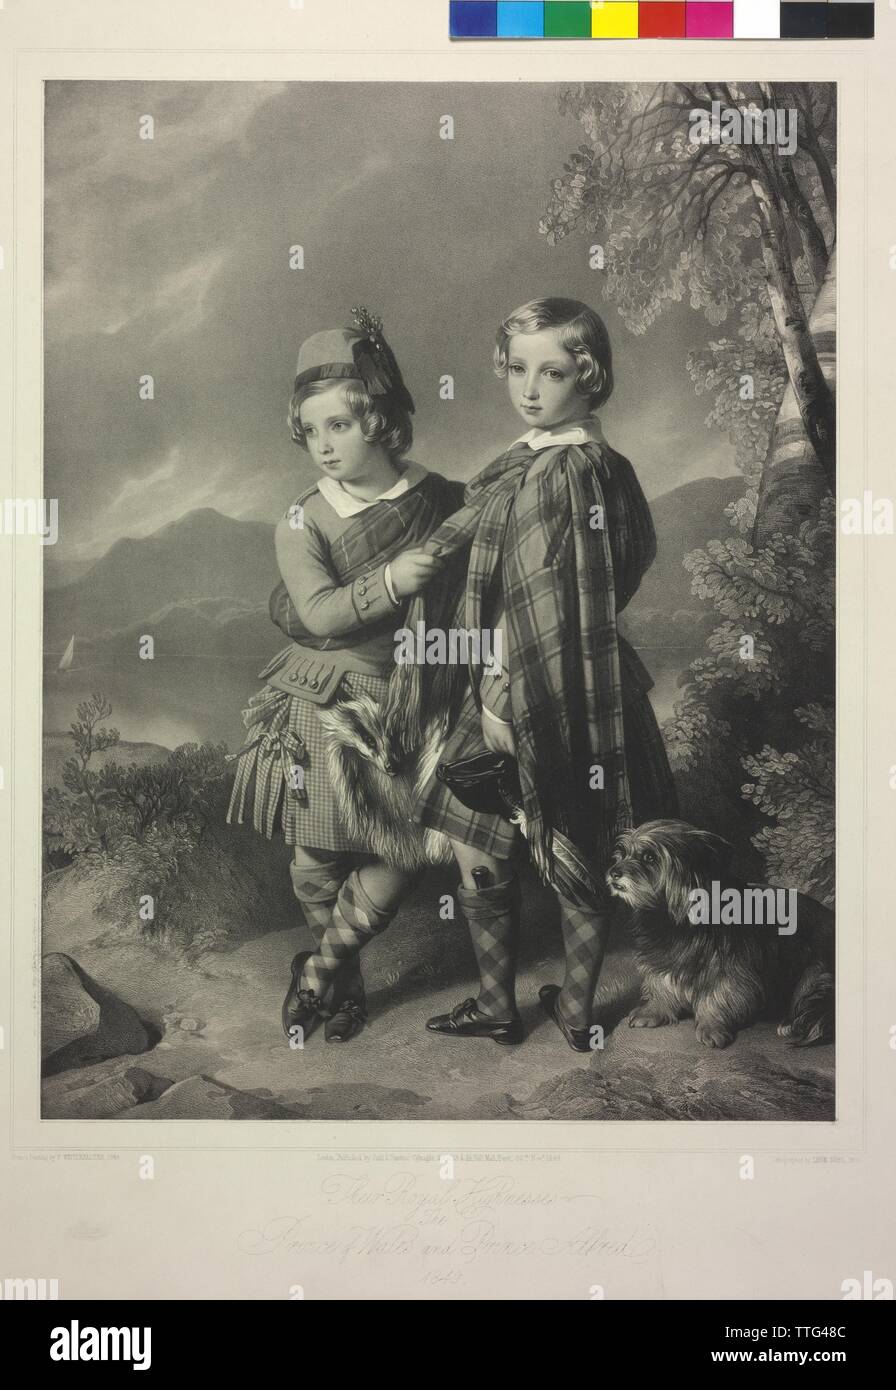 Eduard VII, King of England, Eduard, Prince of Wales, (later Eduard VII, King of England), together with his brother prince Alfred (succeeding Duke of Saxe-Coburg-Gotha), and a dog. portrait of a boy in Scottish traditional costume, lithograph by Alphonse Leon Noël based on a painting by Franz Xavier Winterhalter, Artist's Copyright has not to be cleared Stock Photo